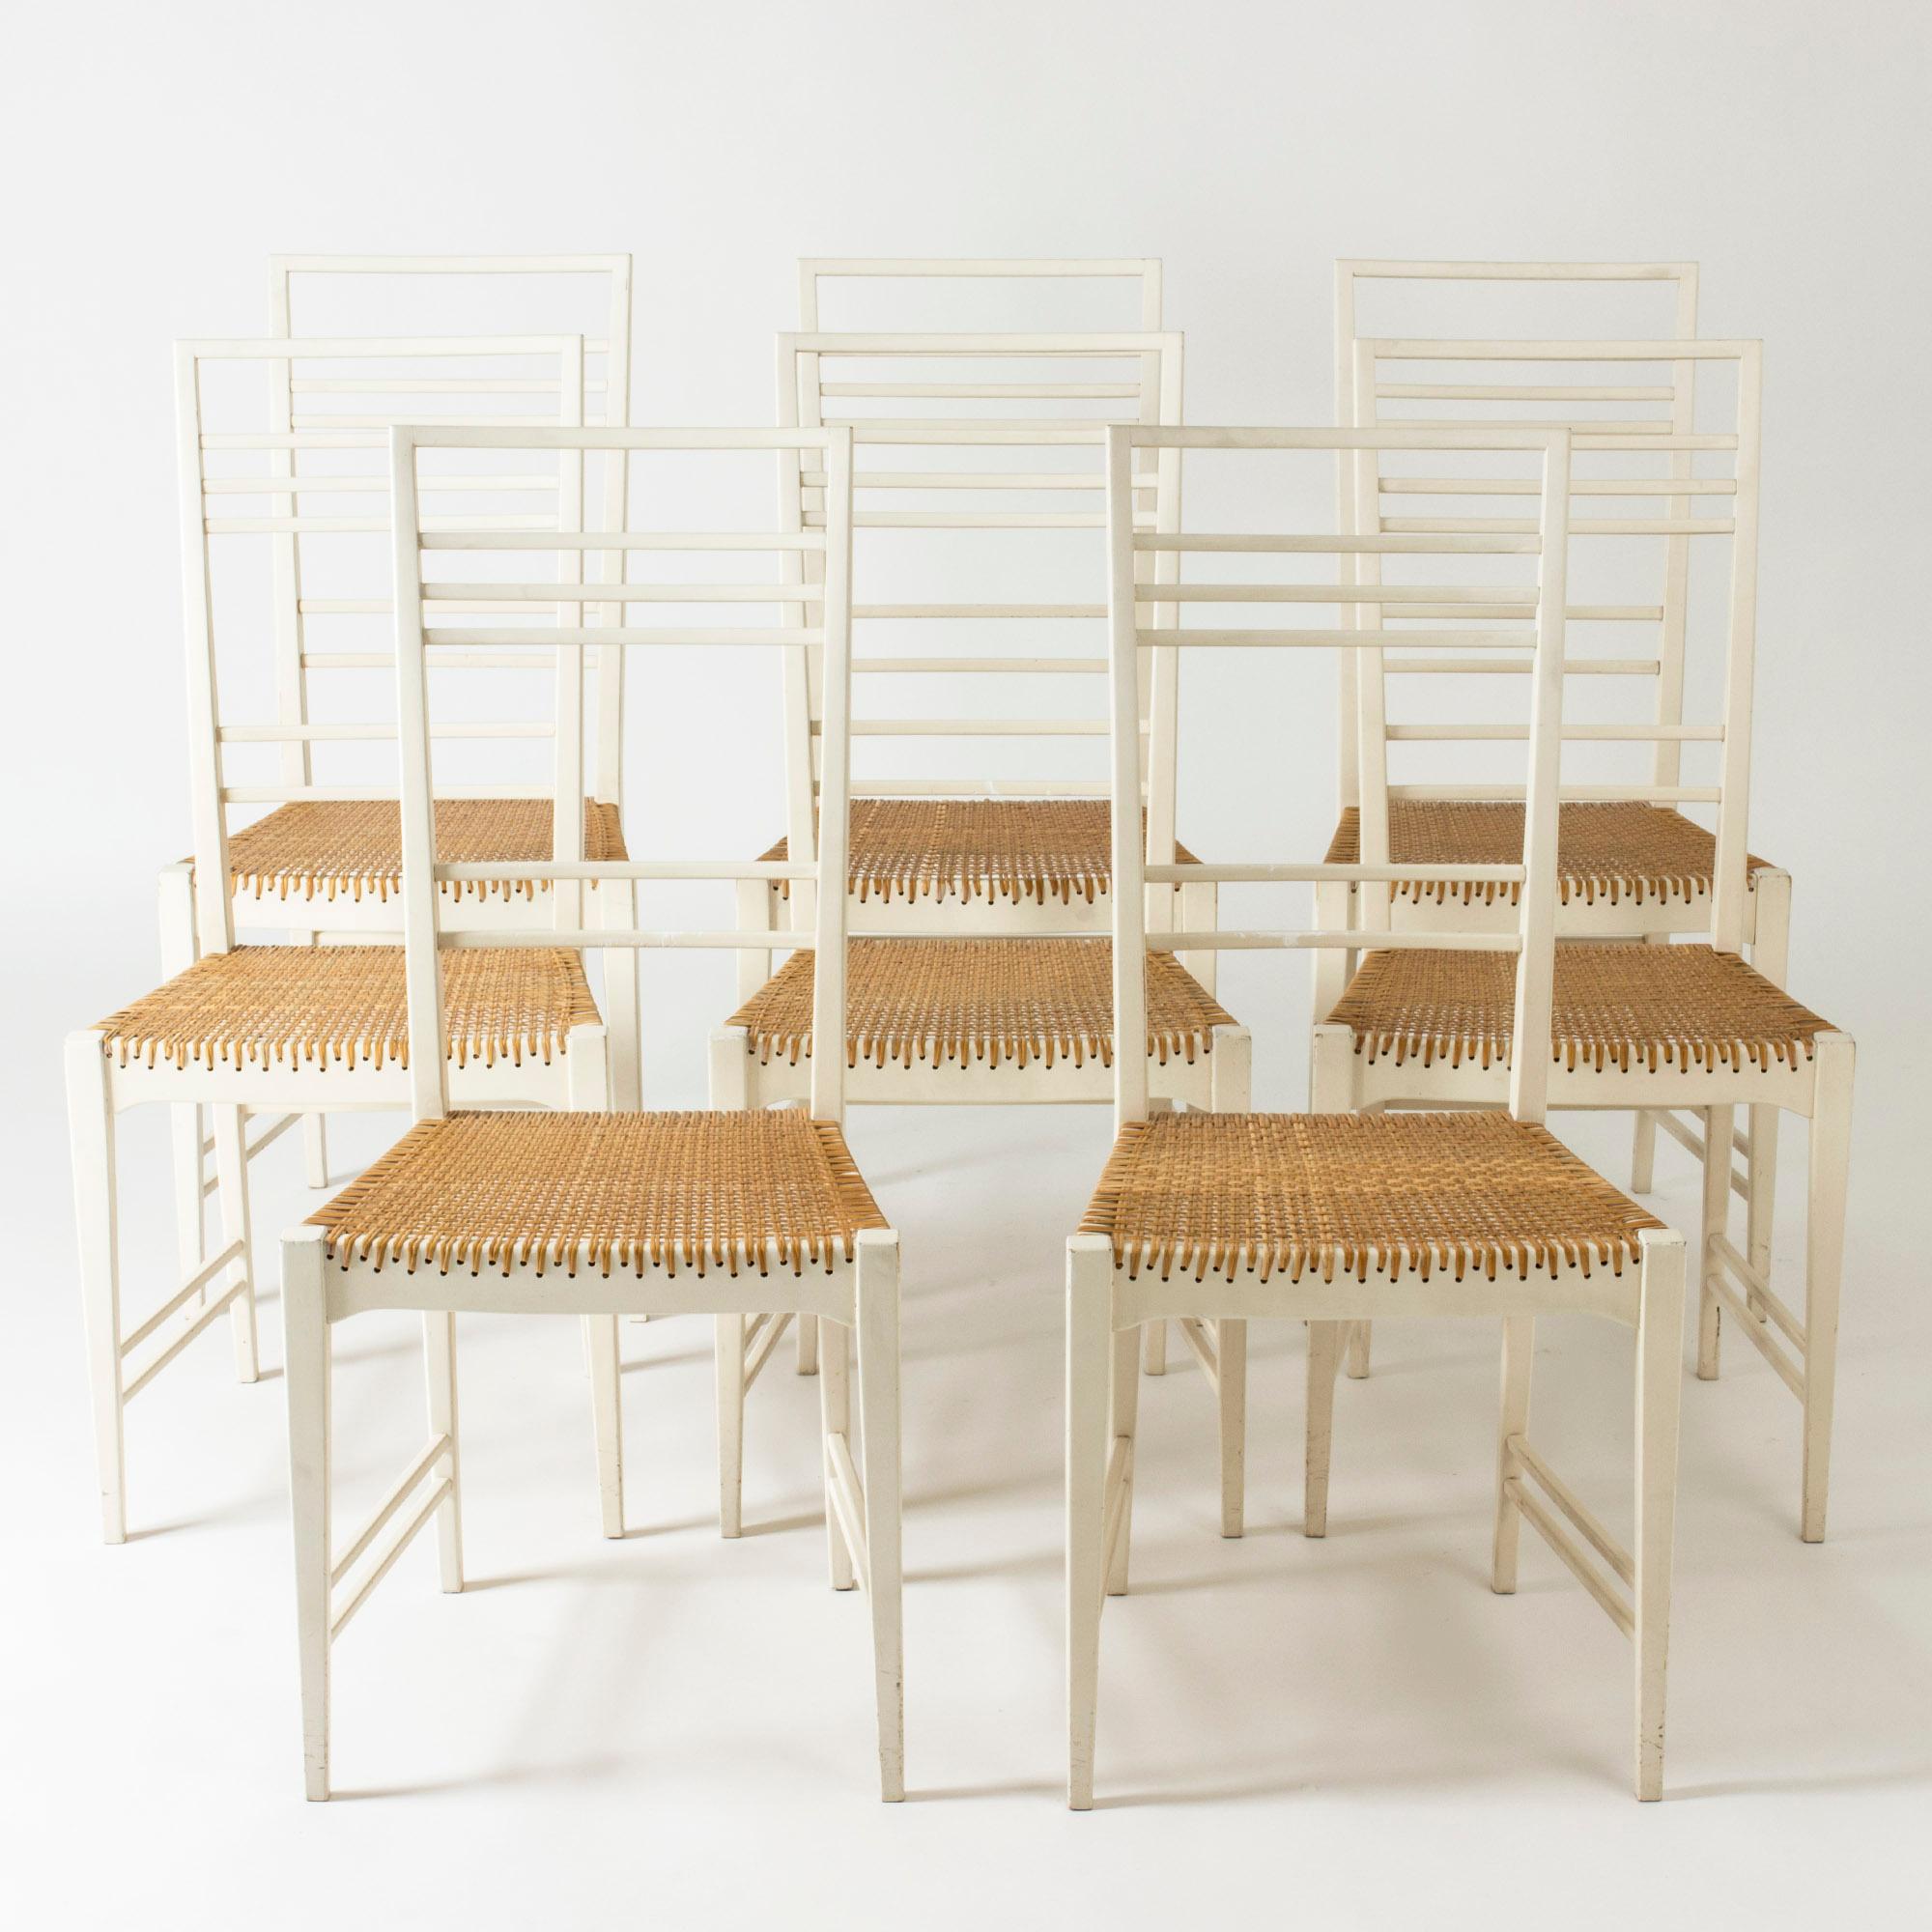 Set of eight “Poem” dining chairs by Erik Chambert, made from white lacquered wood with rattan seats.

The model was first presented in 1953, and the very fitting name for this beautiful design was coined by the art critic and then director of